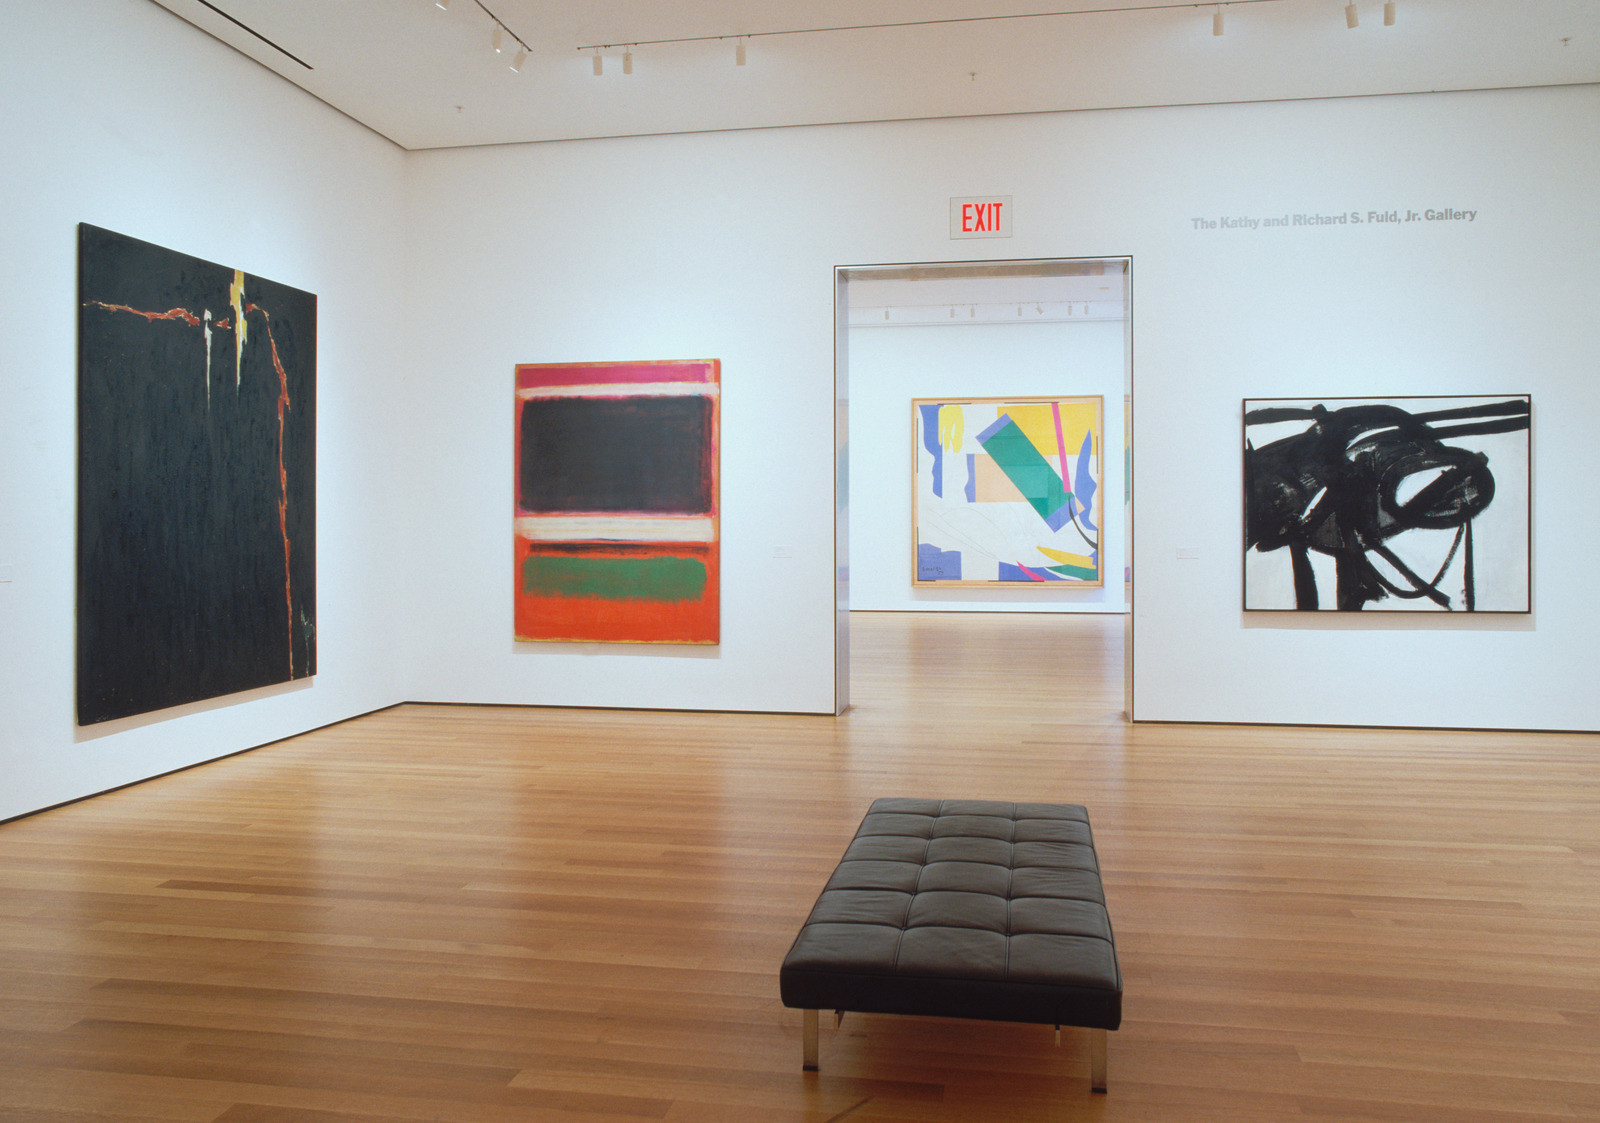 Installation view, Painting & Sculpture II: The Museum of Modern Art,, November 20, 2004–August 5, 2015